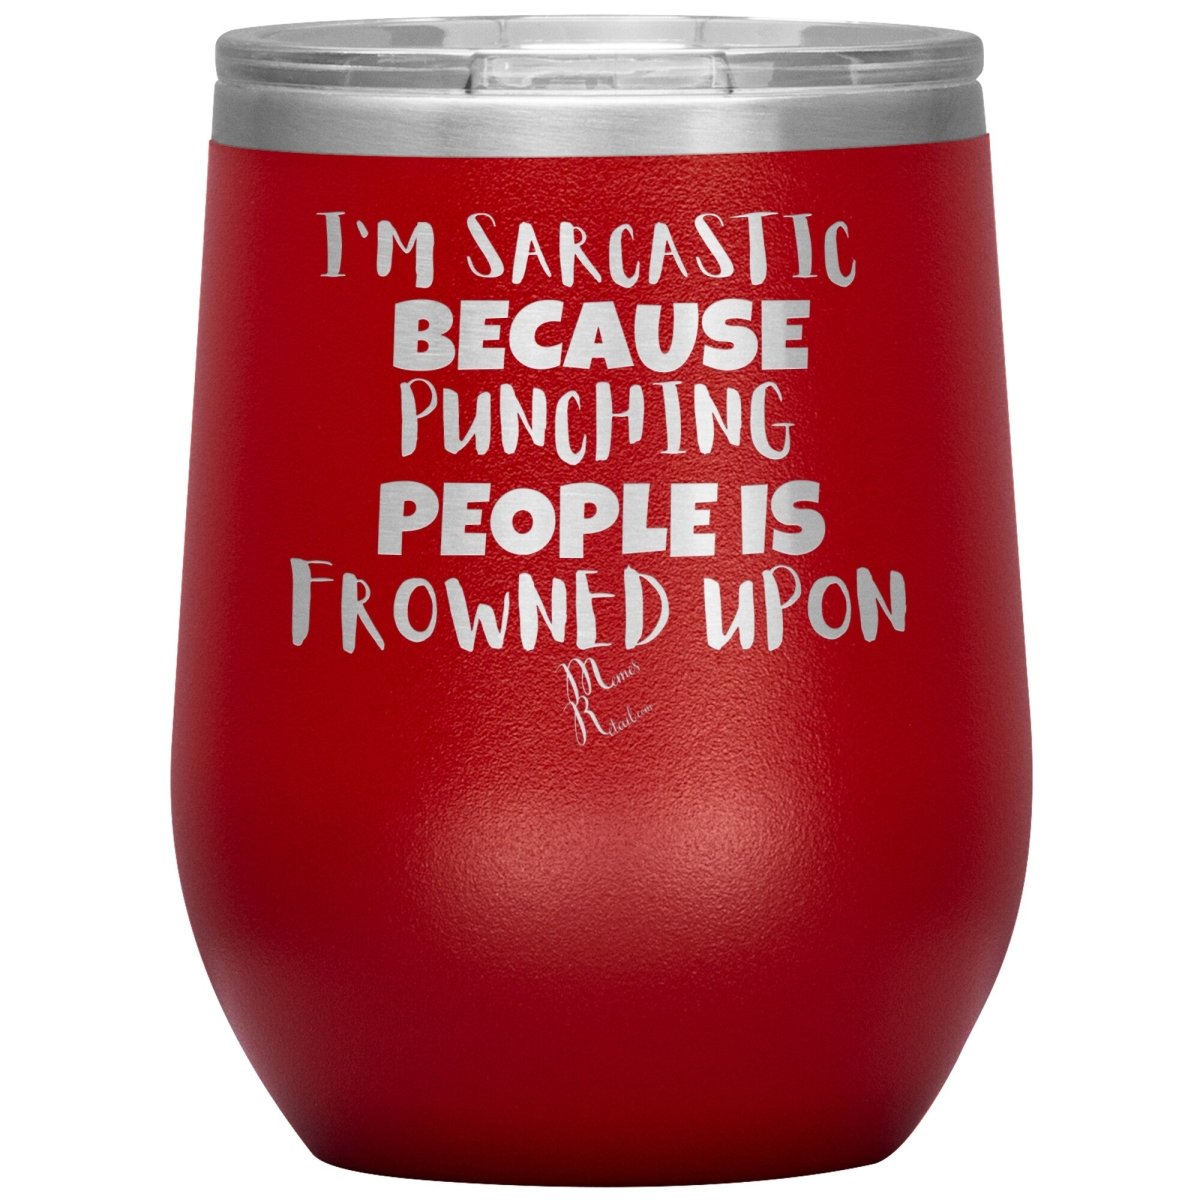 I'm Sarcastic Because Punching People is Frowned Upon Tumblers, 12oz Wine Insulated Tumbler / Red - MemesRetail.com